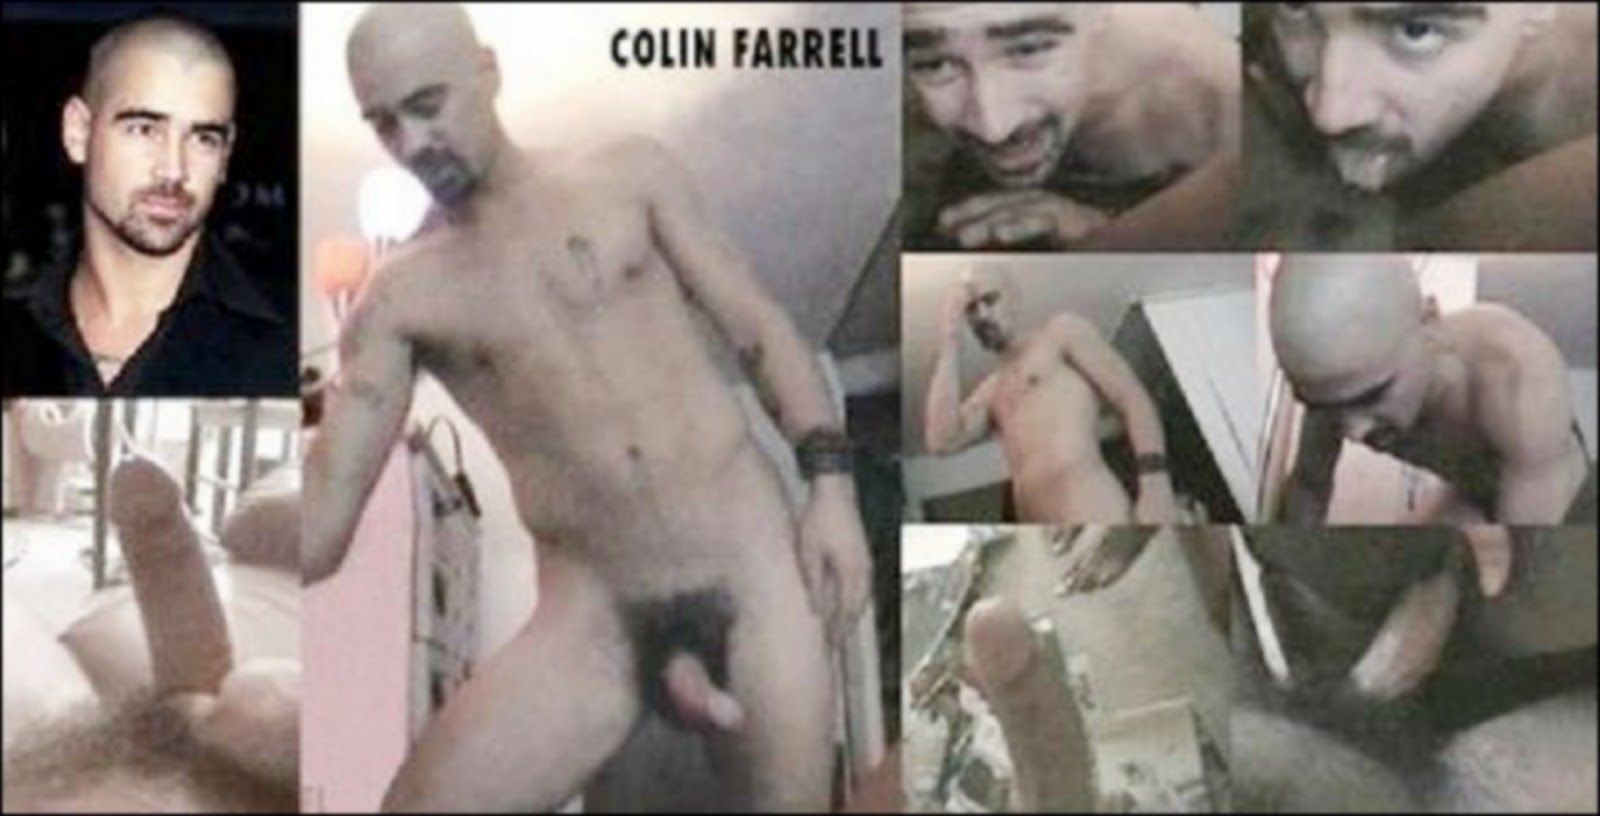 Naked Male Celebrities Page 208 Bannedsextapes Males CLOOBEX HOT GIRL.